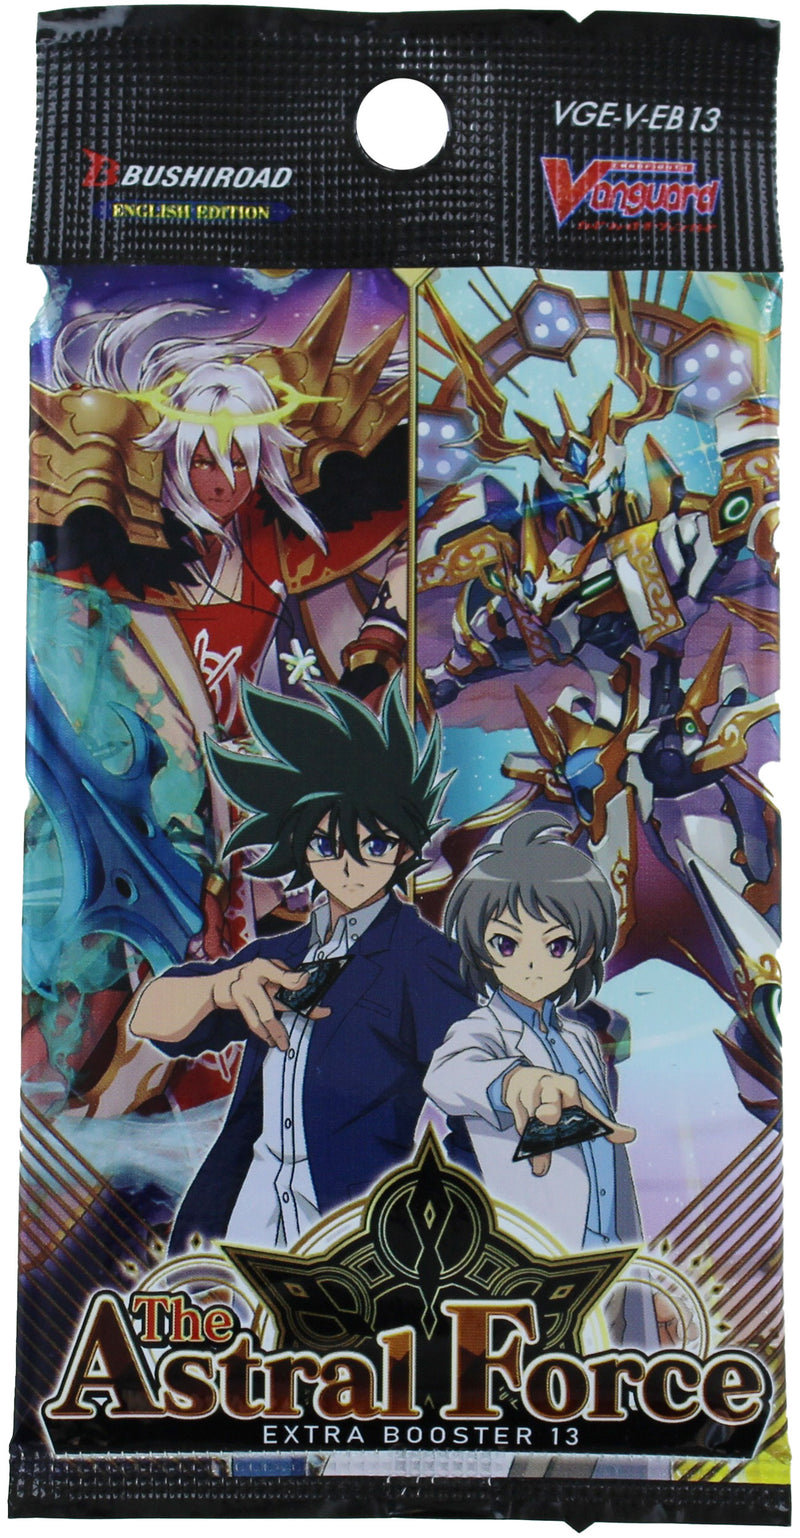 Cardfight!! Vanguard The Astral Force Extra Booster 13